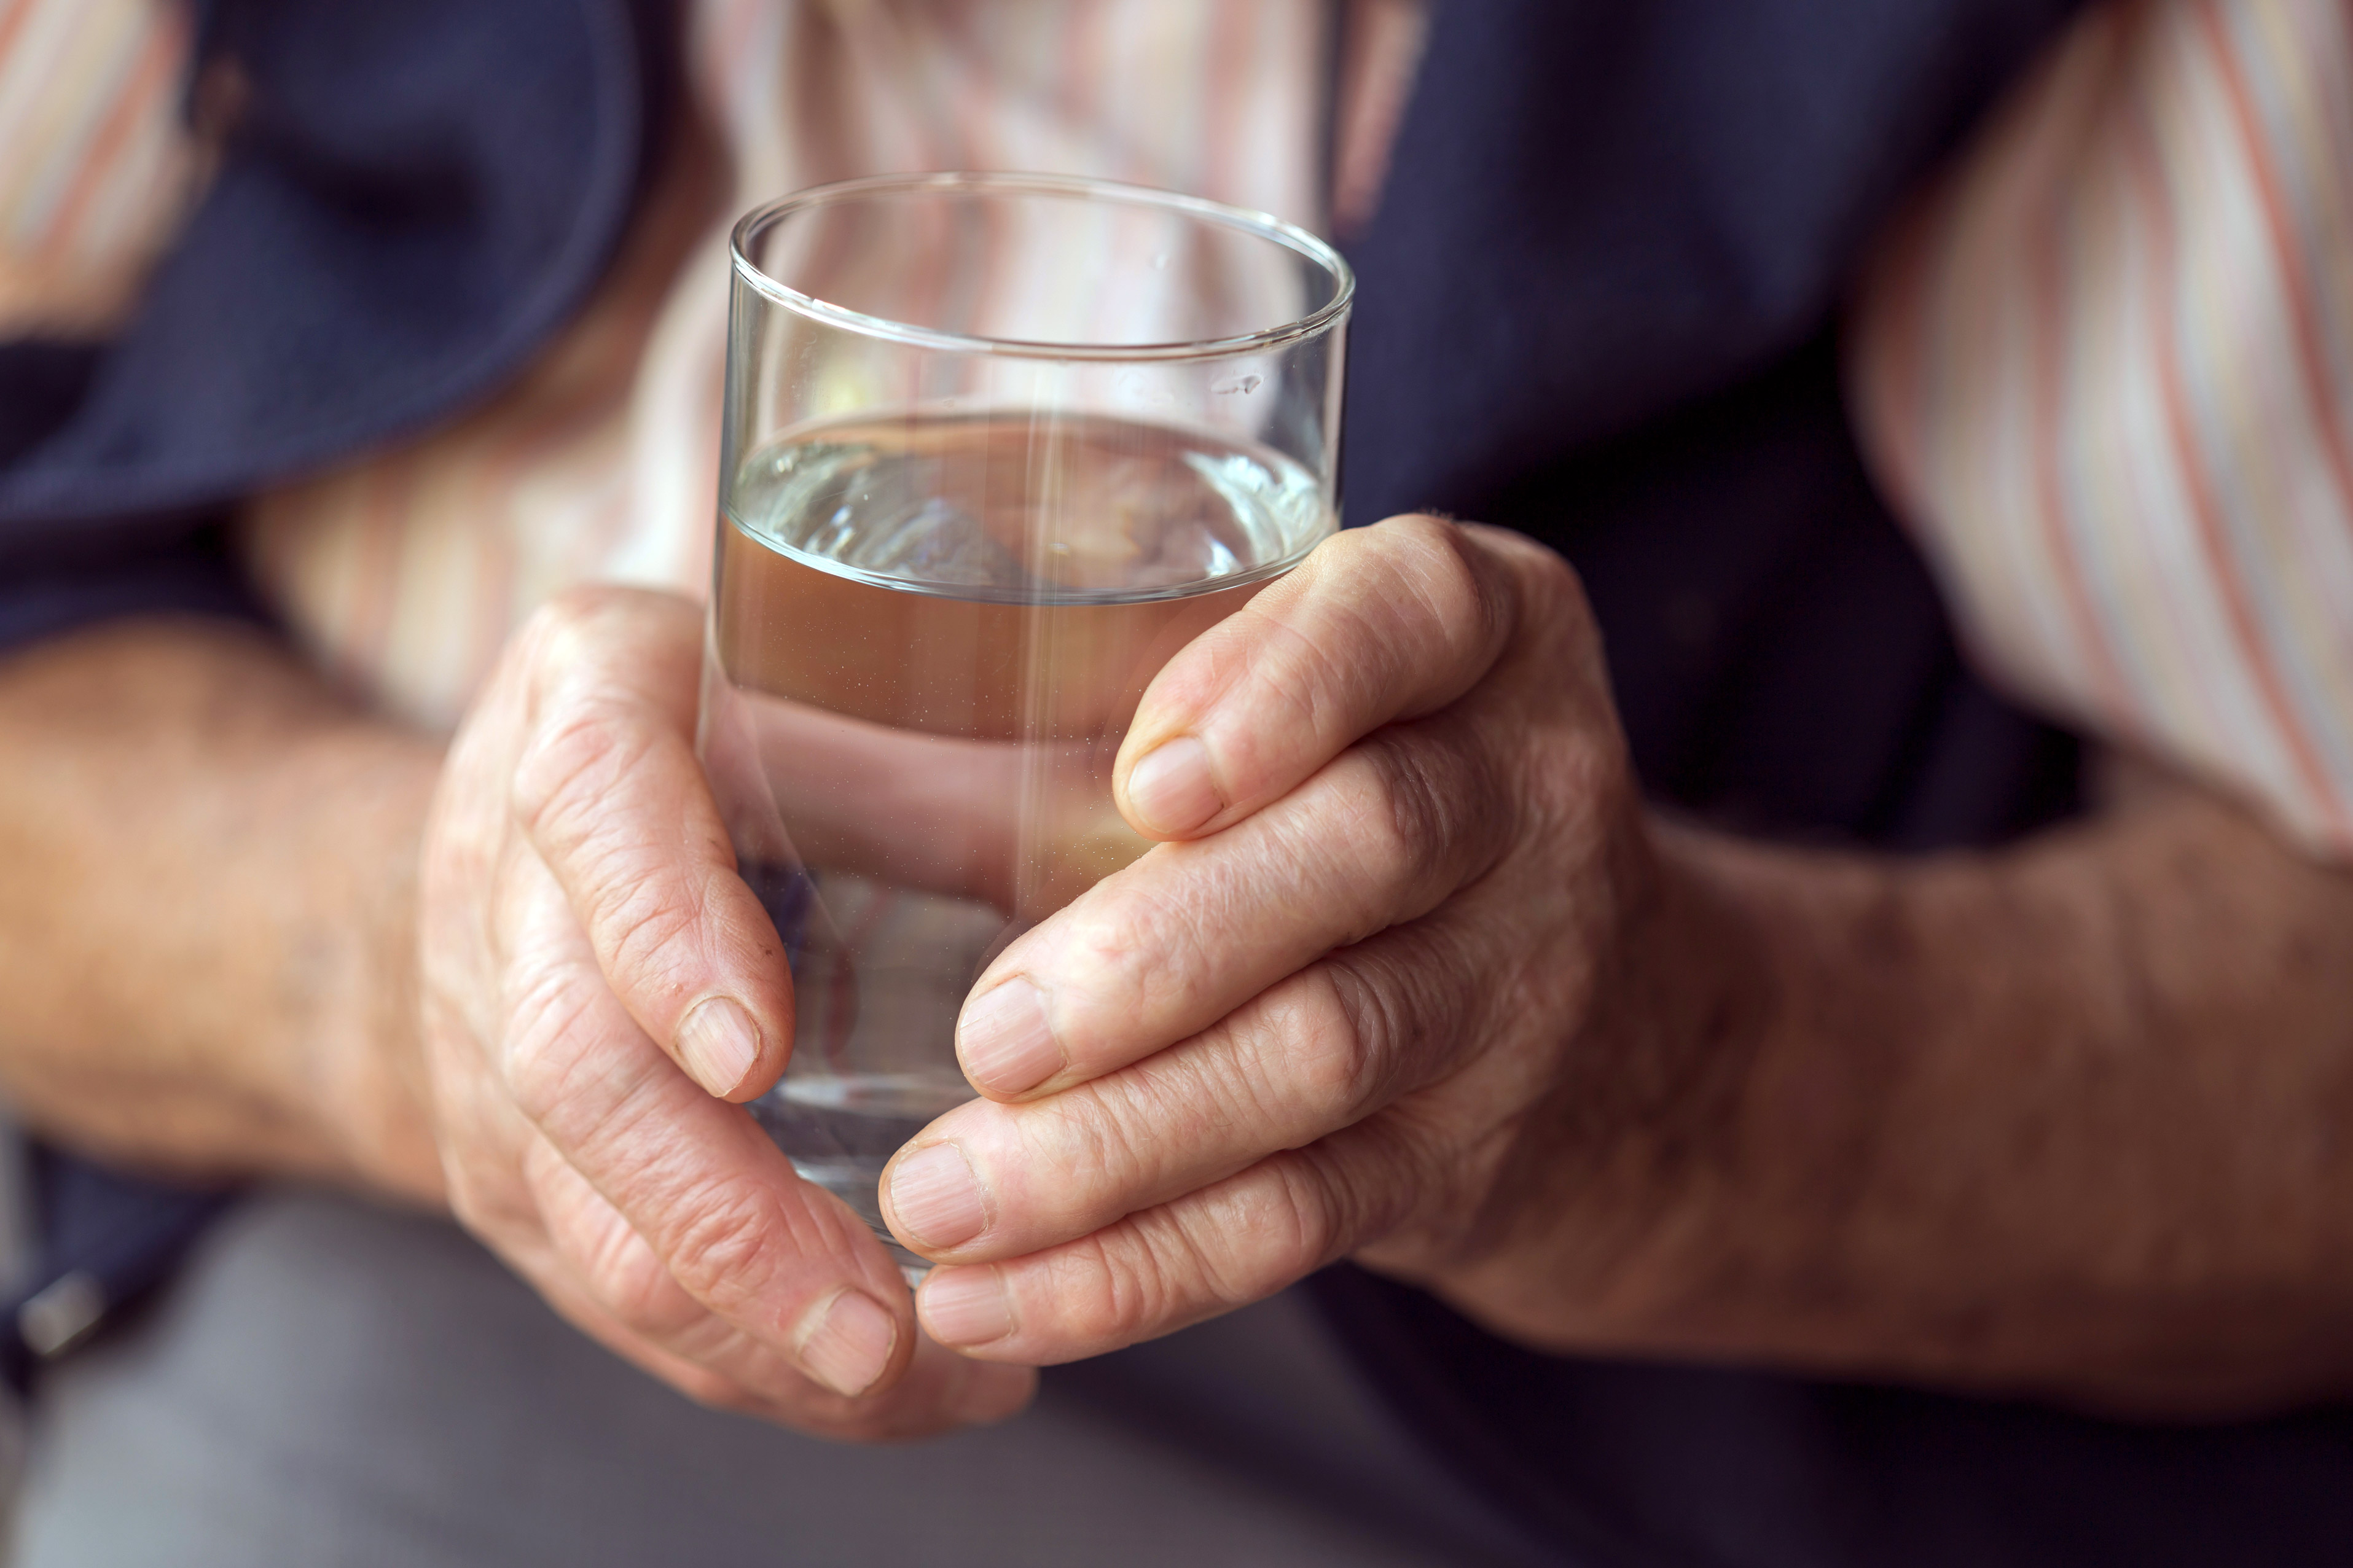 A glass of water being held in two hands by an elderly white person